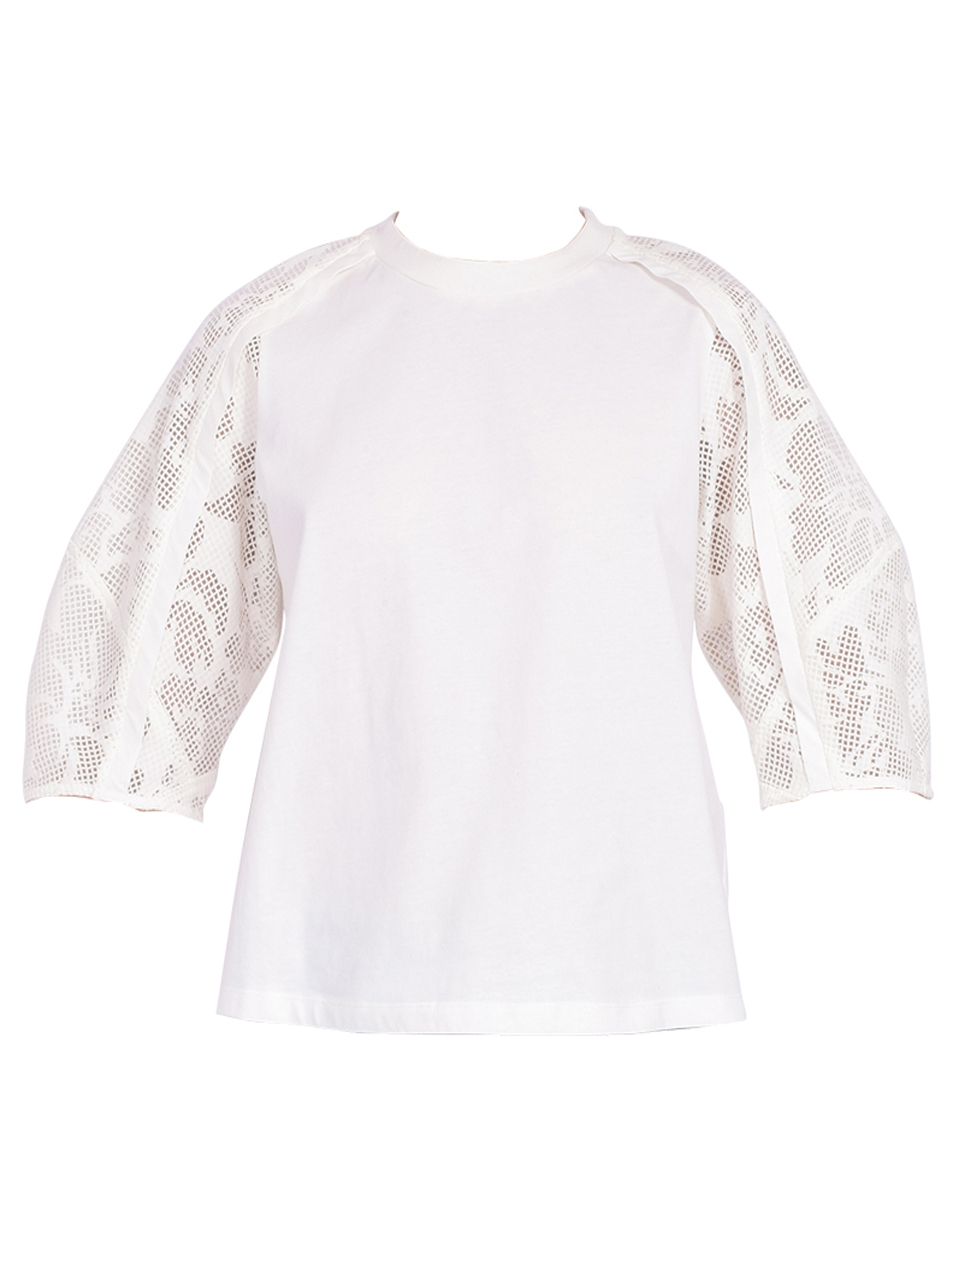 3.1 Phillip Lim Bonded Lace Combo T-Shirt in White Product Shot 